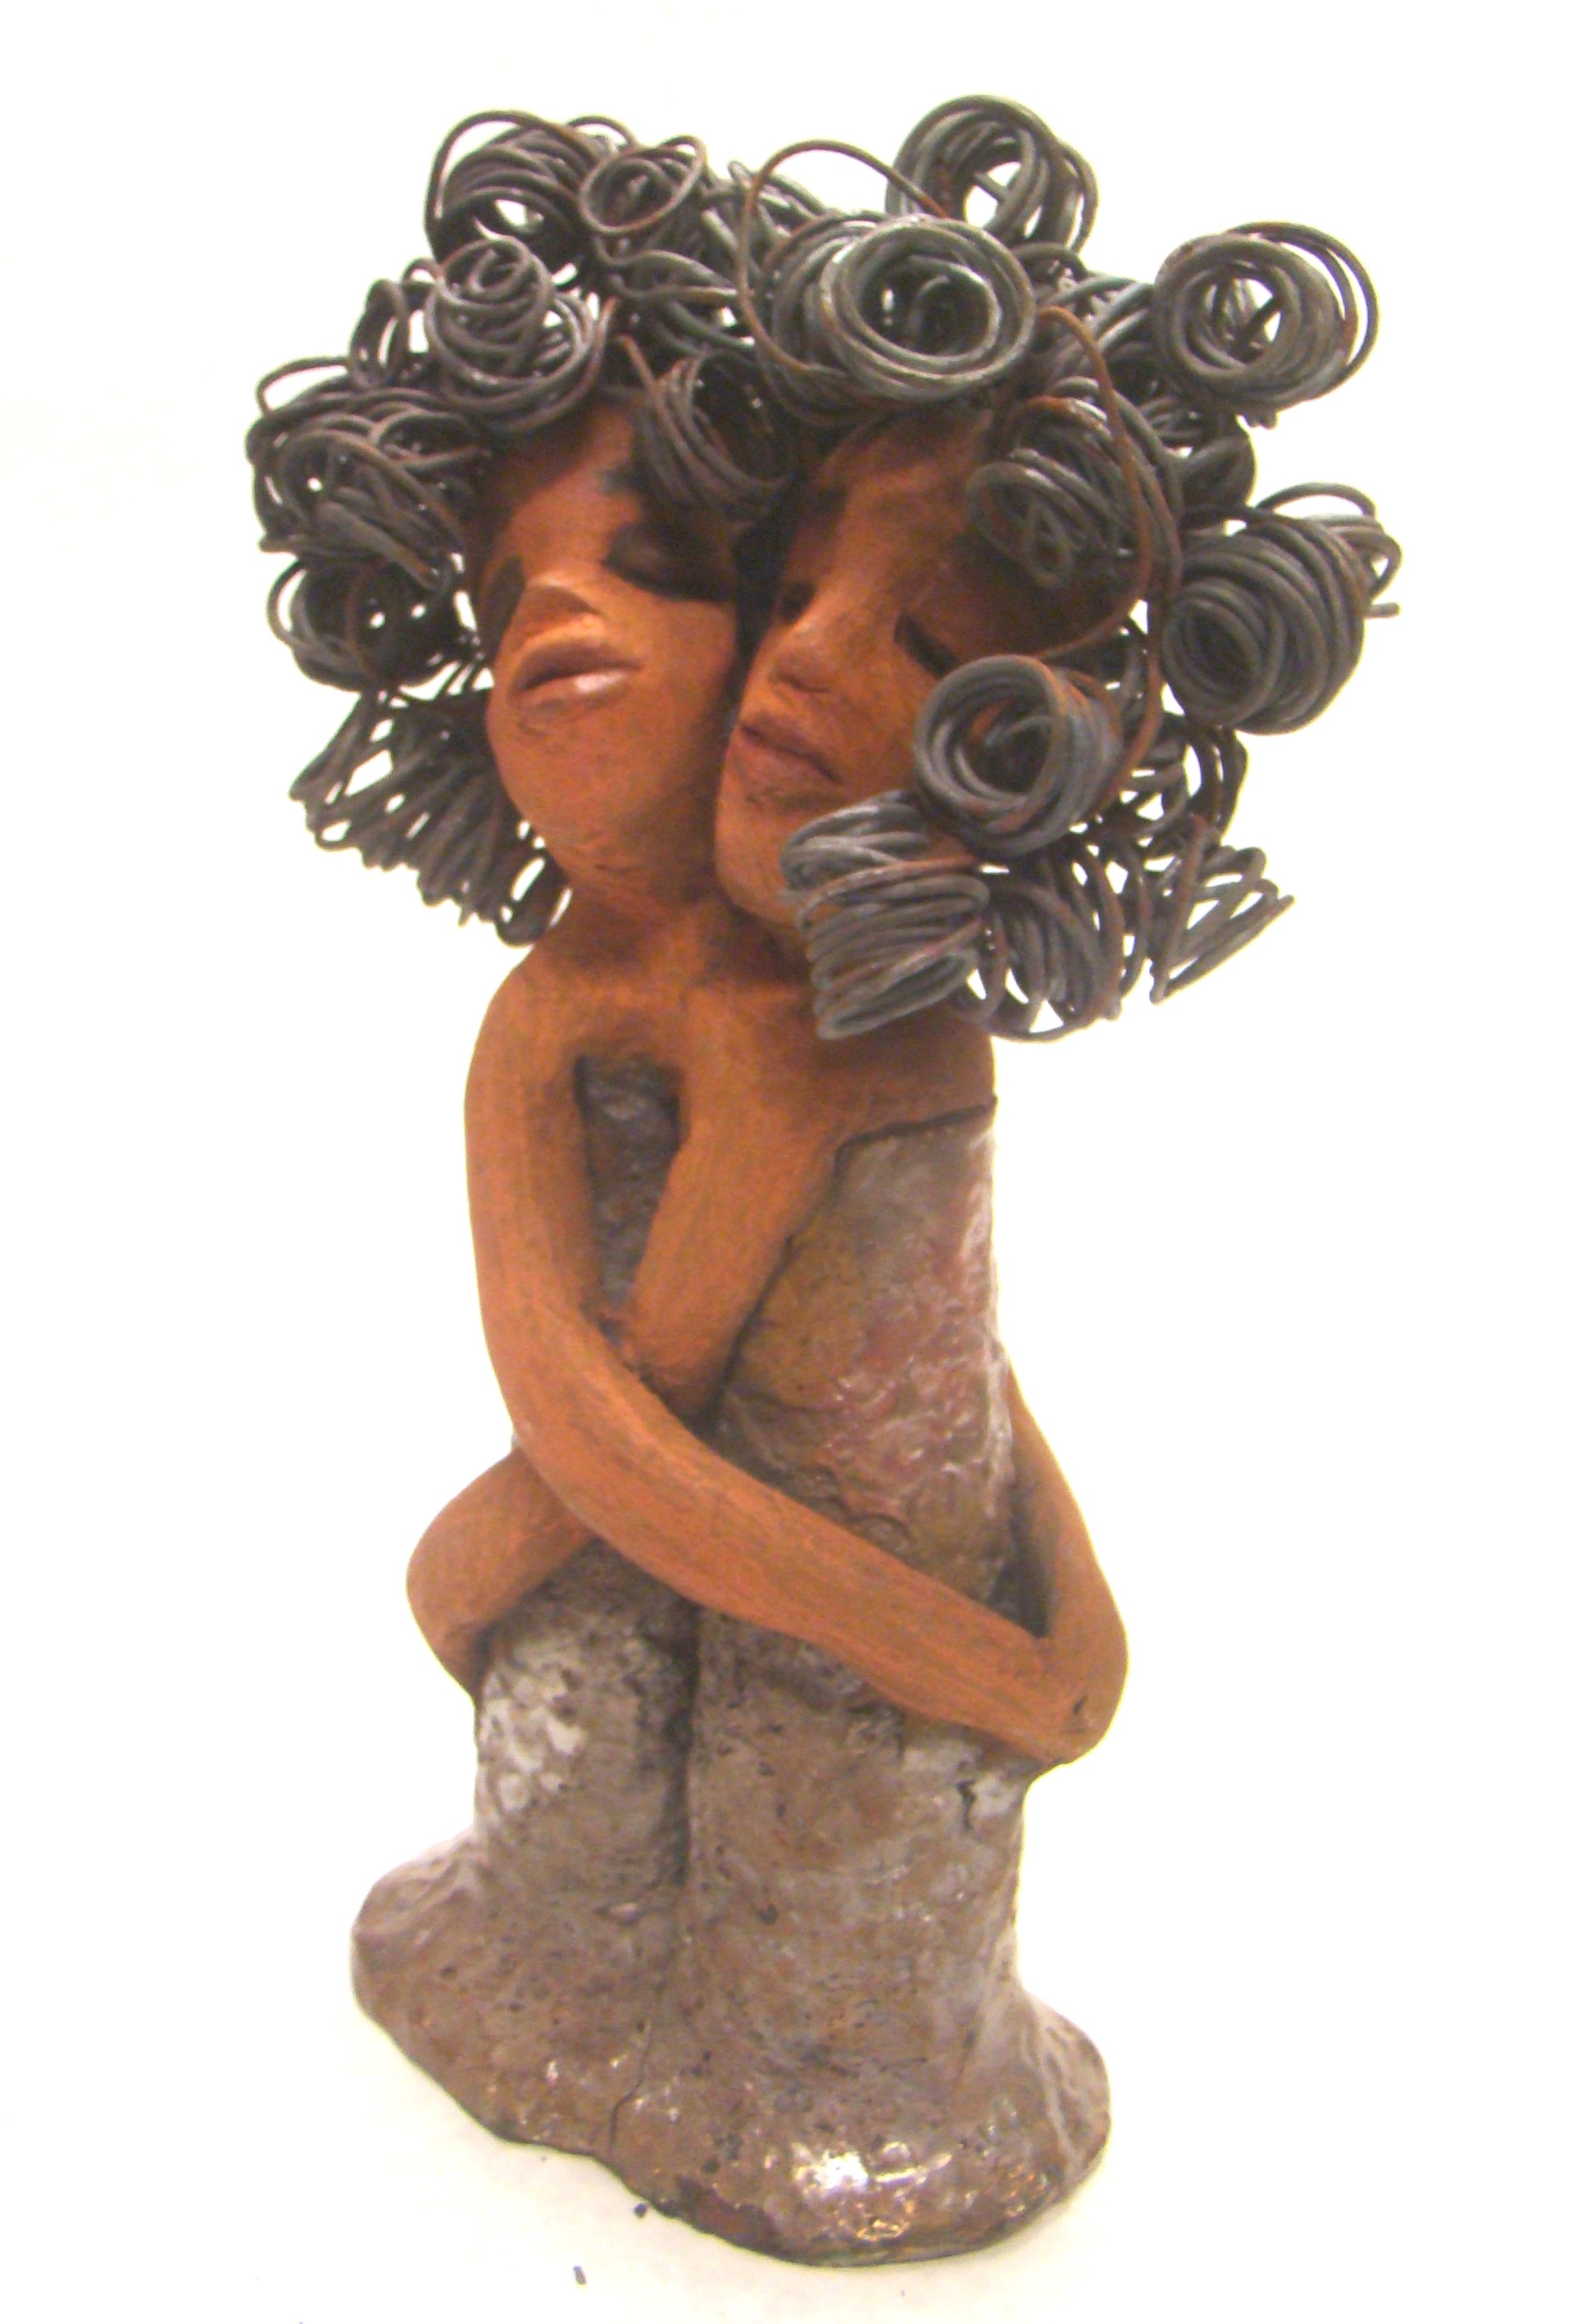 Sister Love stands 11" x 5" x 3" and weighs 2.06 lbs﻿. Combined they have over 45 feet of curled 16 gauge wire hair. The dresses are textured with an antique copper glaze. They have lovely honey brown complexions.  Sister Love is inseparable! Give them a special place in your home. Free Shipping!